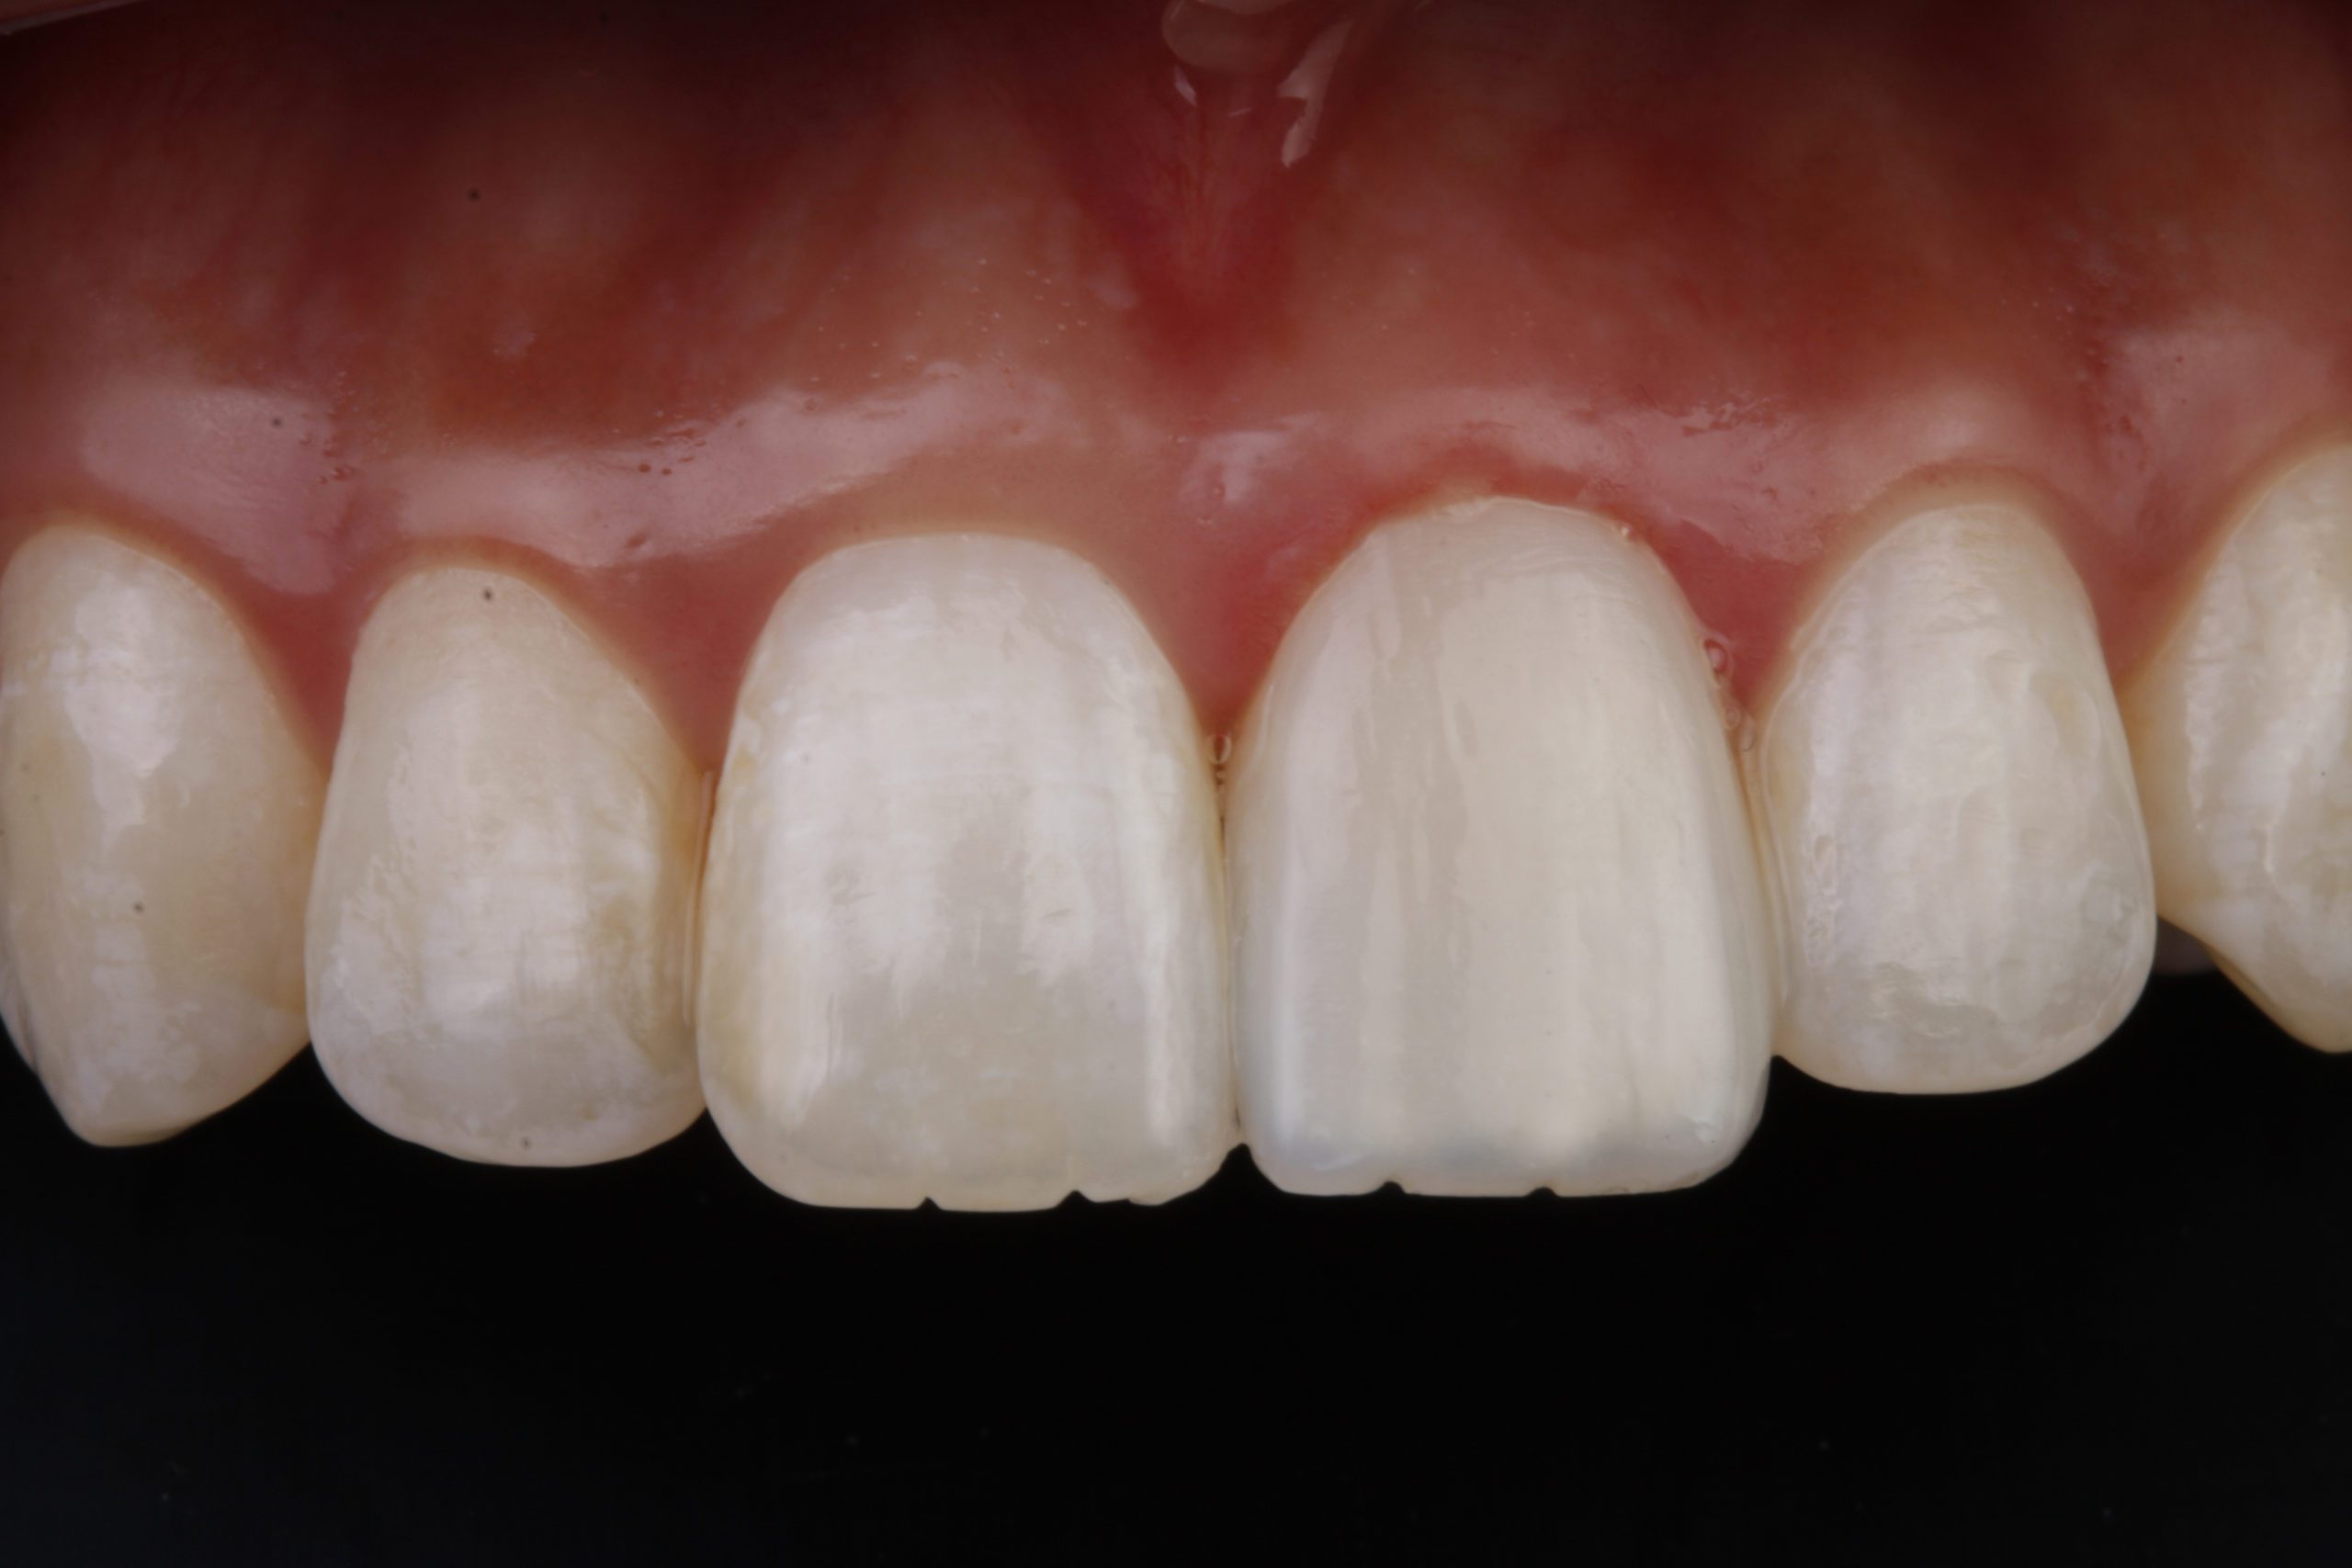 Composite Bonding with Dr. David Chan/ COURSE FULL!  Fill out ‘Contact Us’ form to get on a waitlist. course tile image